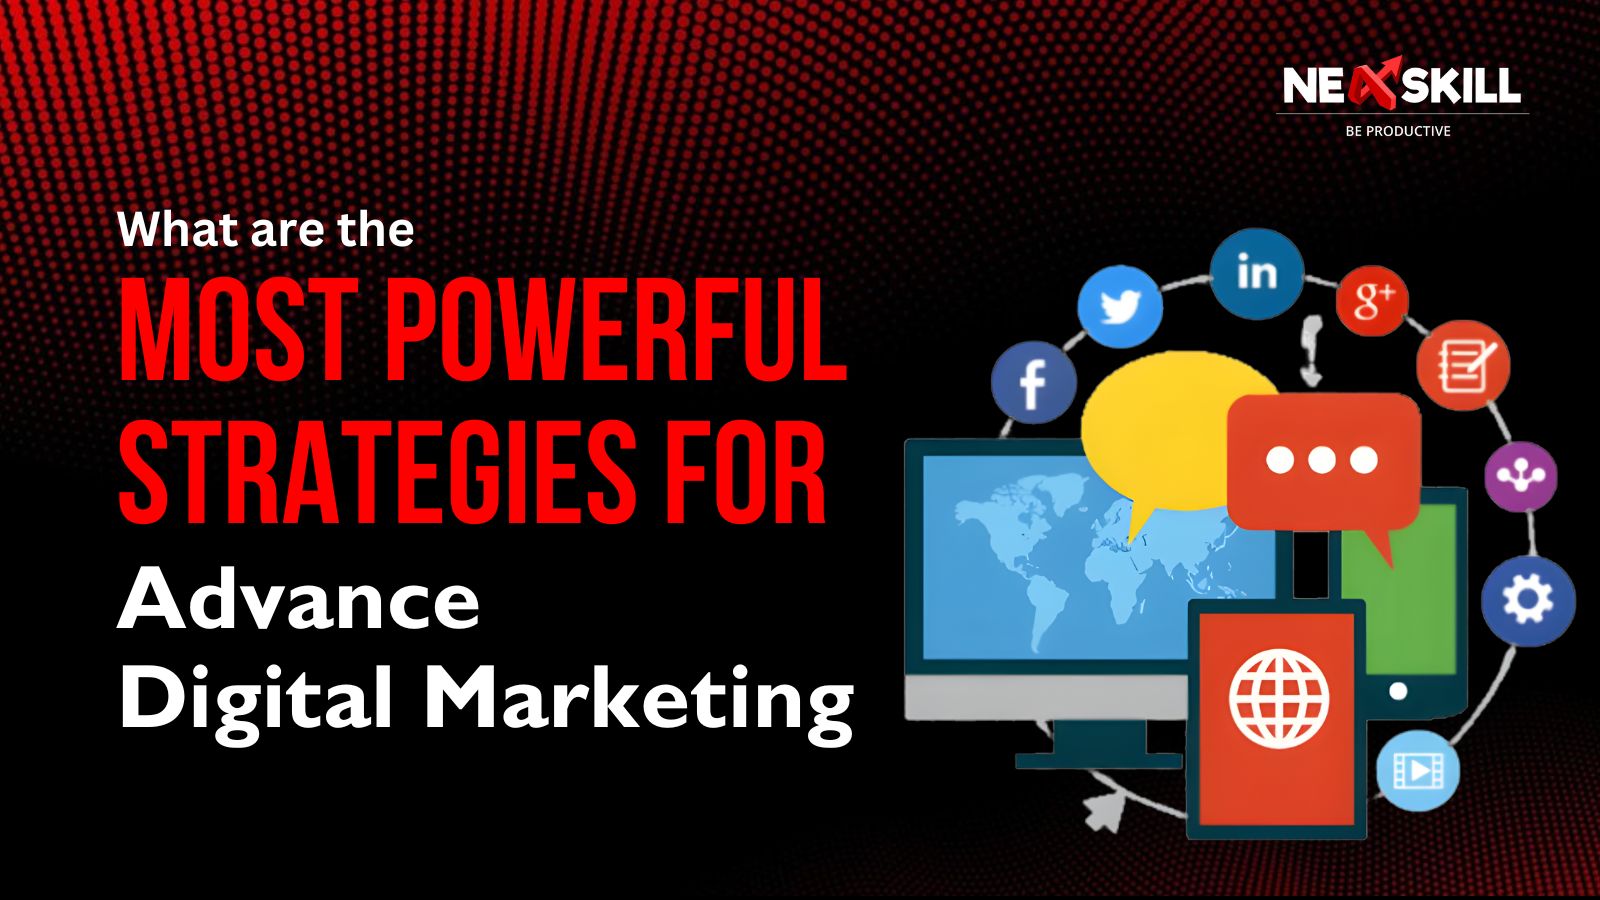 What are the most powerful Strategies for digital marketing?